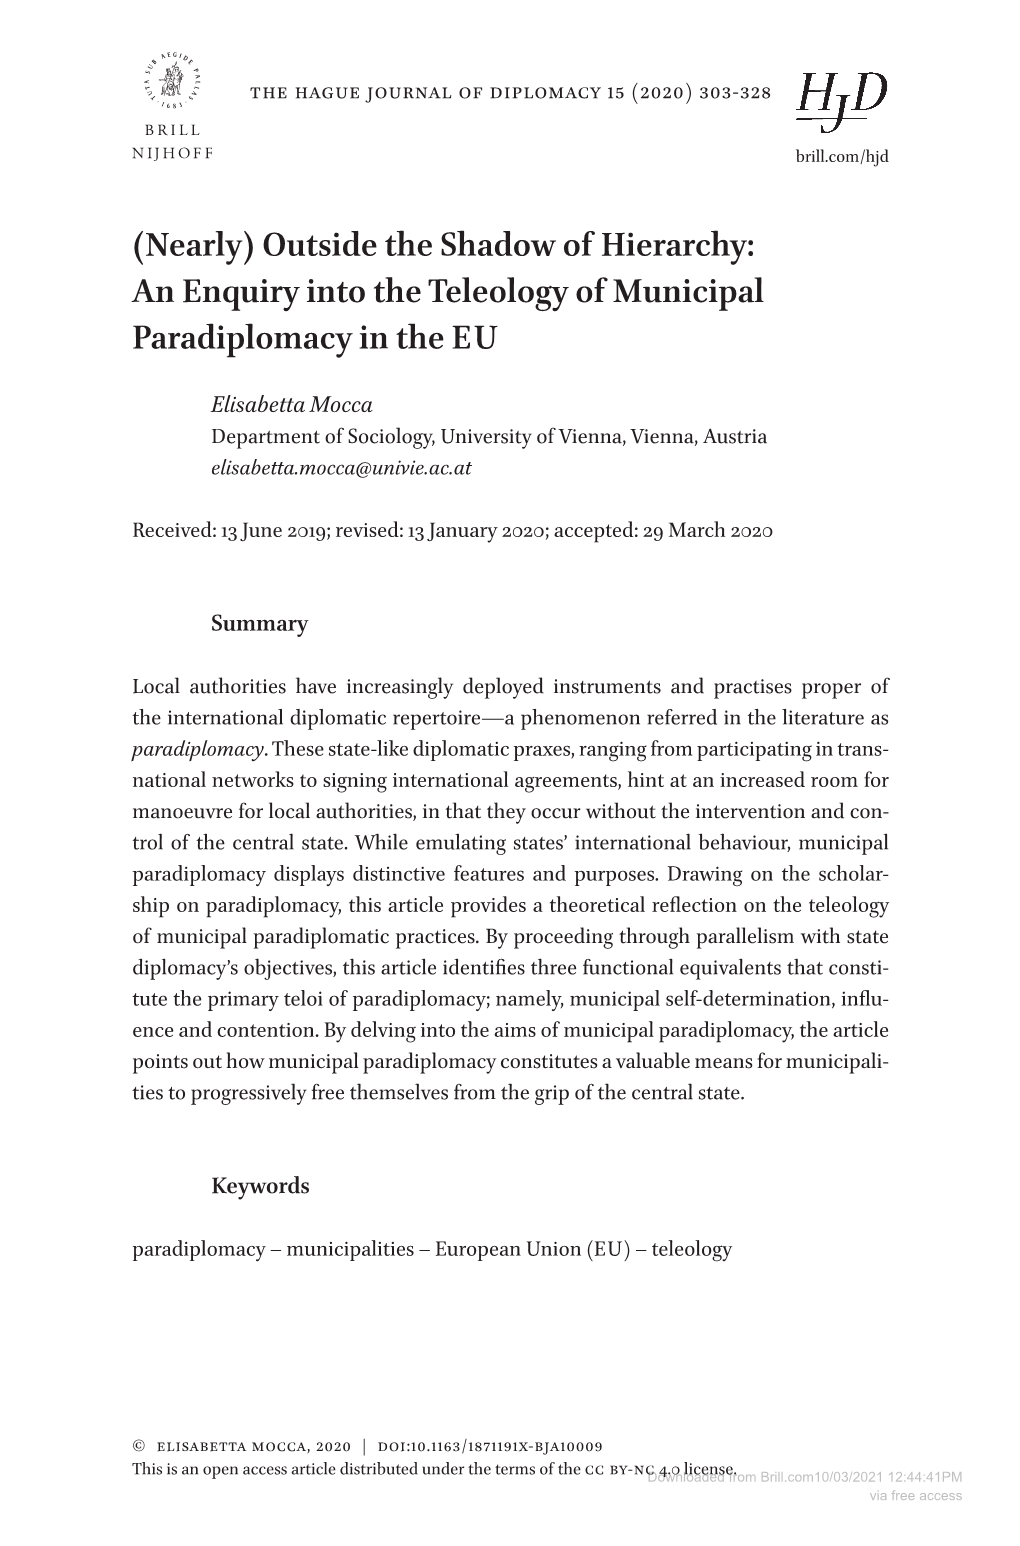 An Enquiry Into the Teleology of Municipal Paradiplomacy in the EU